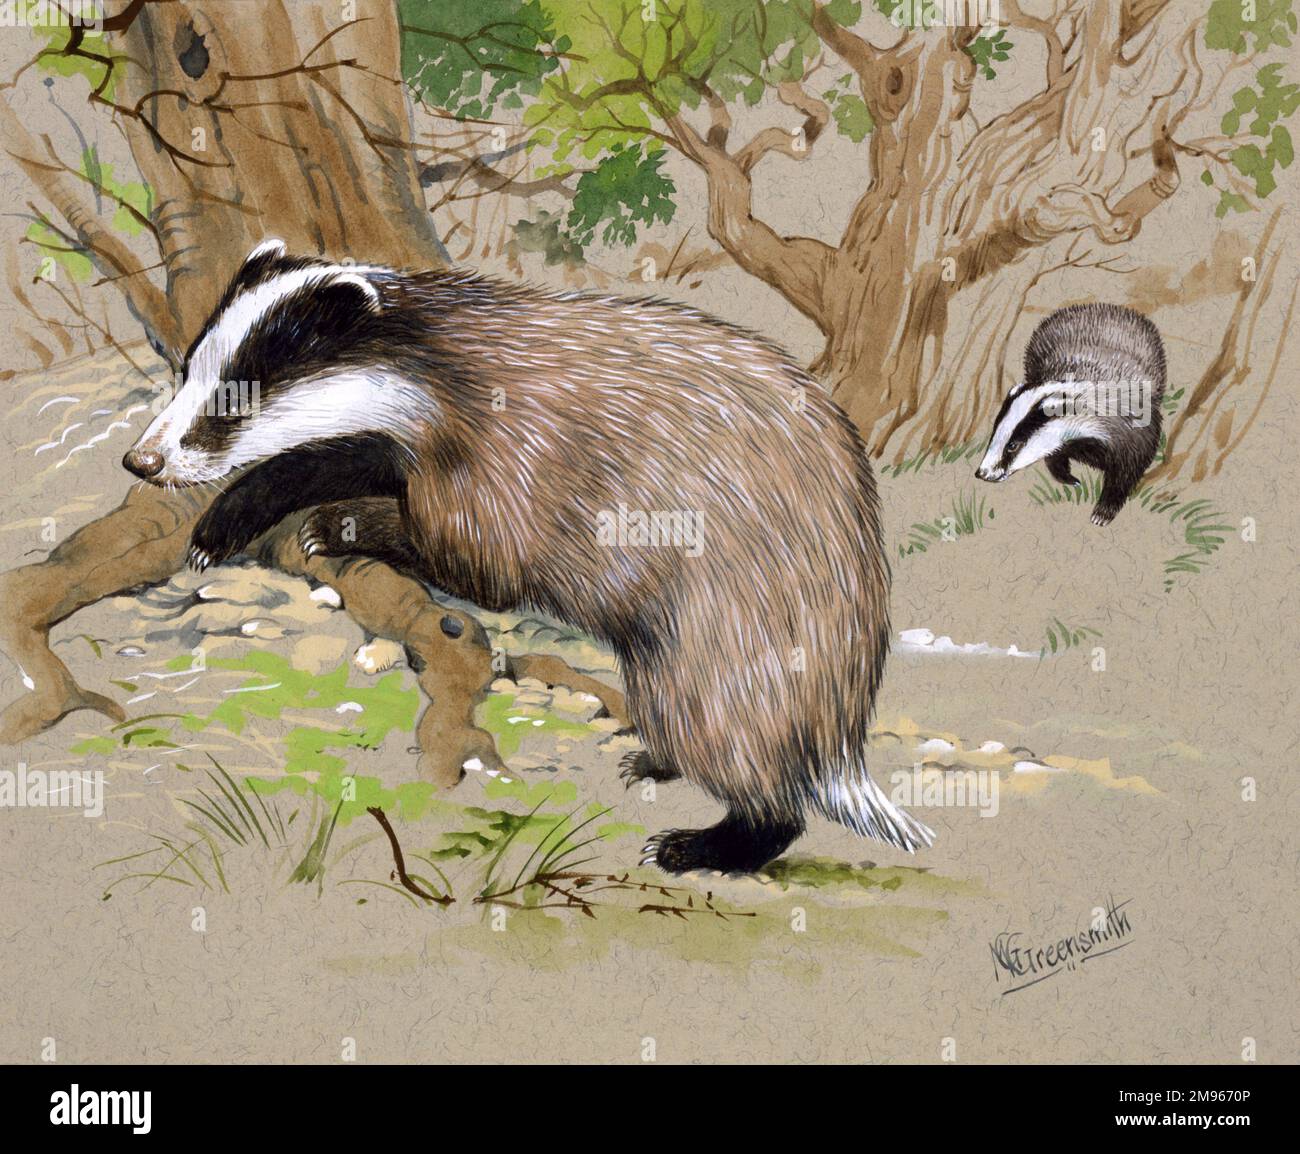 Two badgers (Meles meles) forage for food in a wood. Painting by Malcolm Greensmith Stock Photo